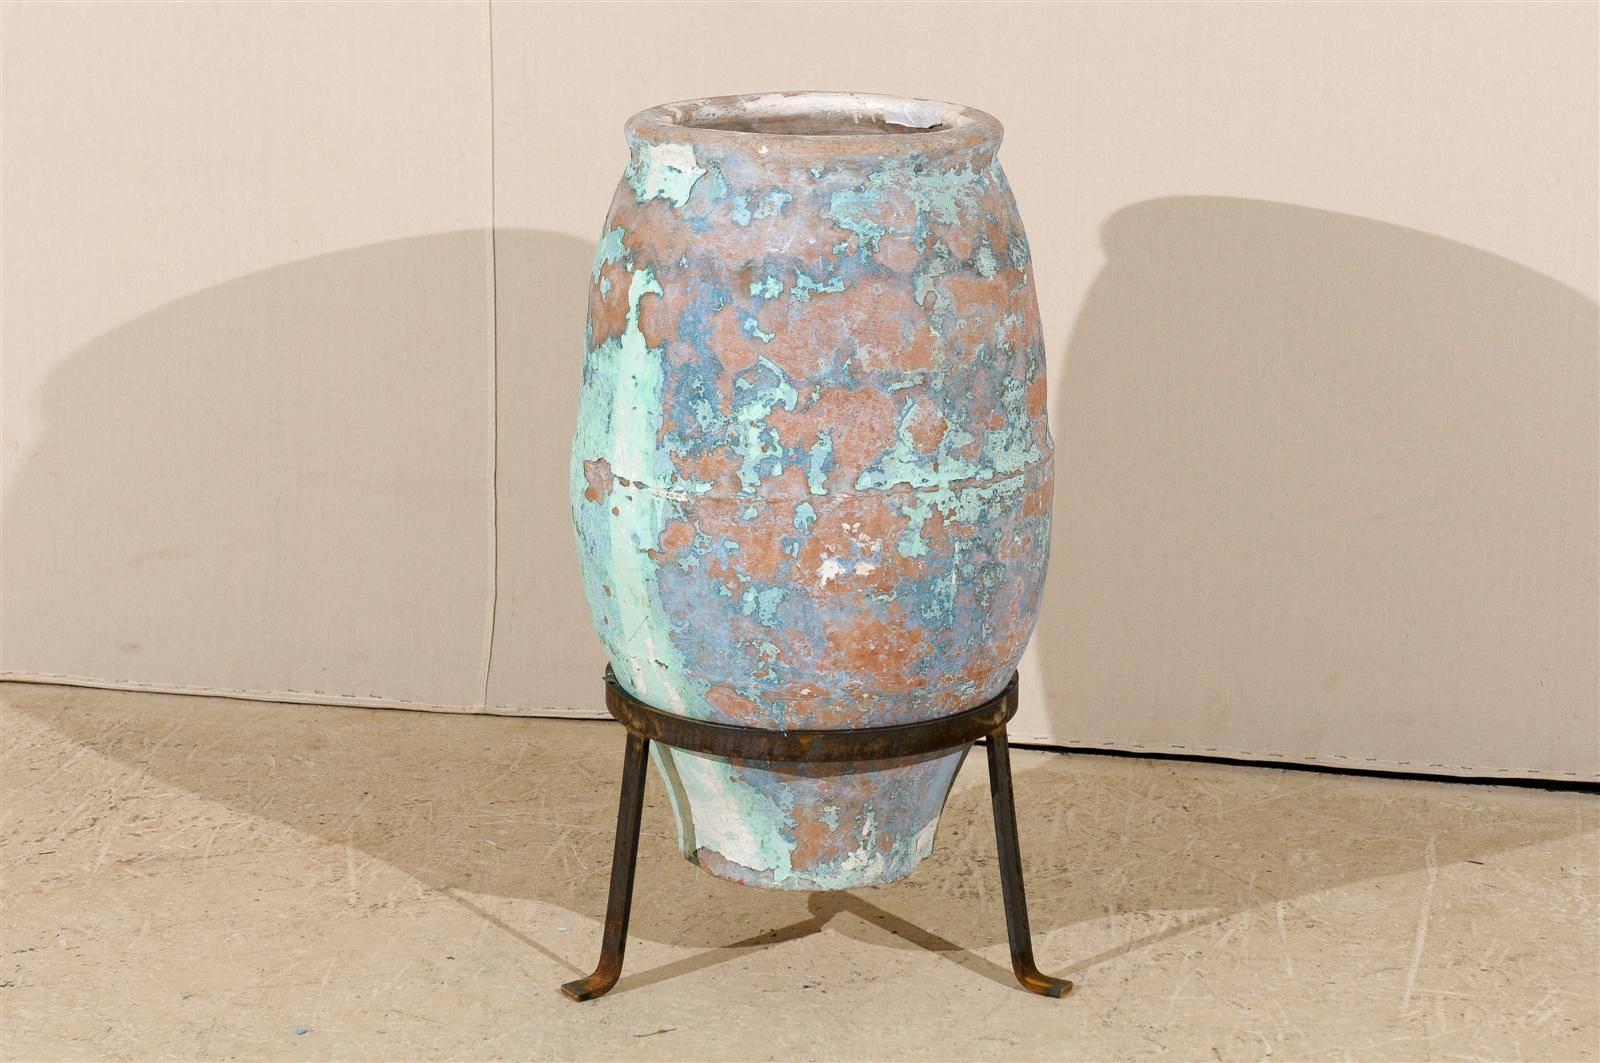 A large Spanish olive jar from the mid-19th century. This wide body Spanish terracotta olive jar features traces of exquisite blue and turquoise colors throughout. This piece is raised on a custom-made metal tripod stand. This Spanish jar would look